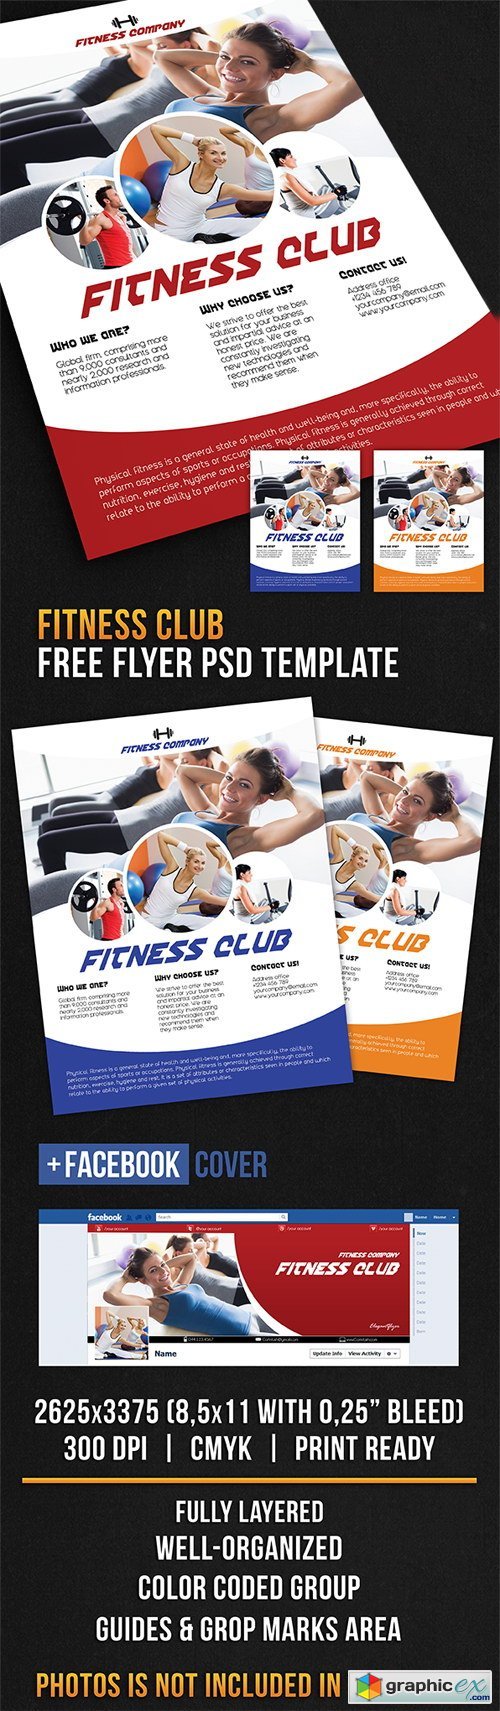 Fitness club  Flyer PSD Template + Facebook Cover